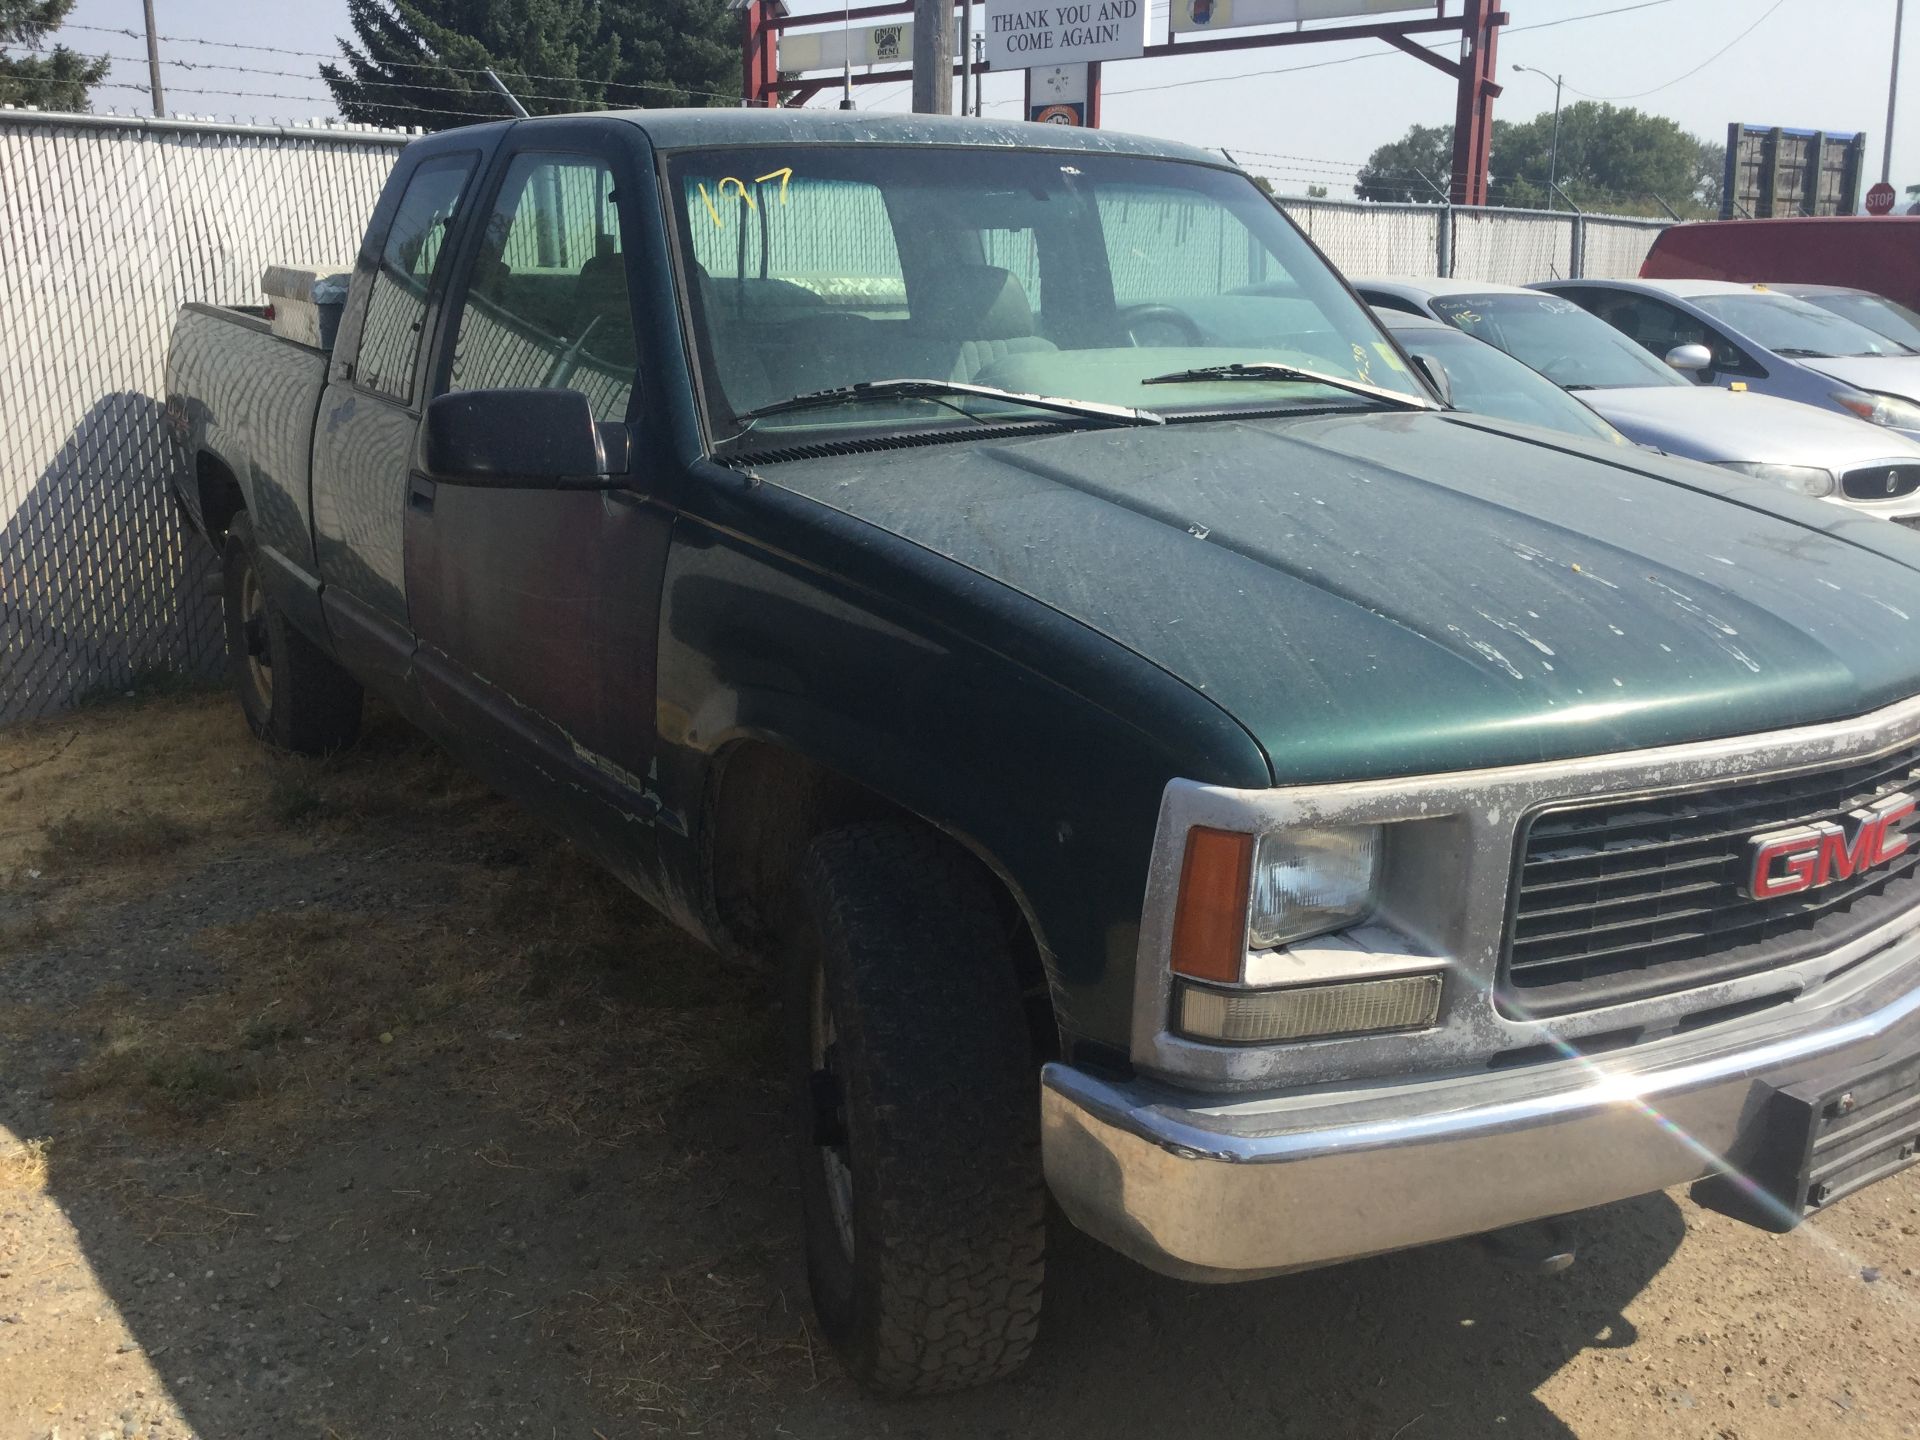 Year: 1996 Make: GMC Model: 1/2T Type: Pickup Vin#: 539146 Mileage/Hours: 178977 5.7L, 4x4, 5sp, XC, - Image 3 of 3